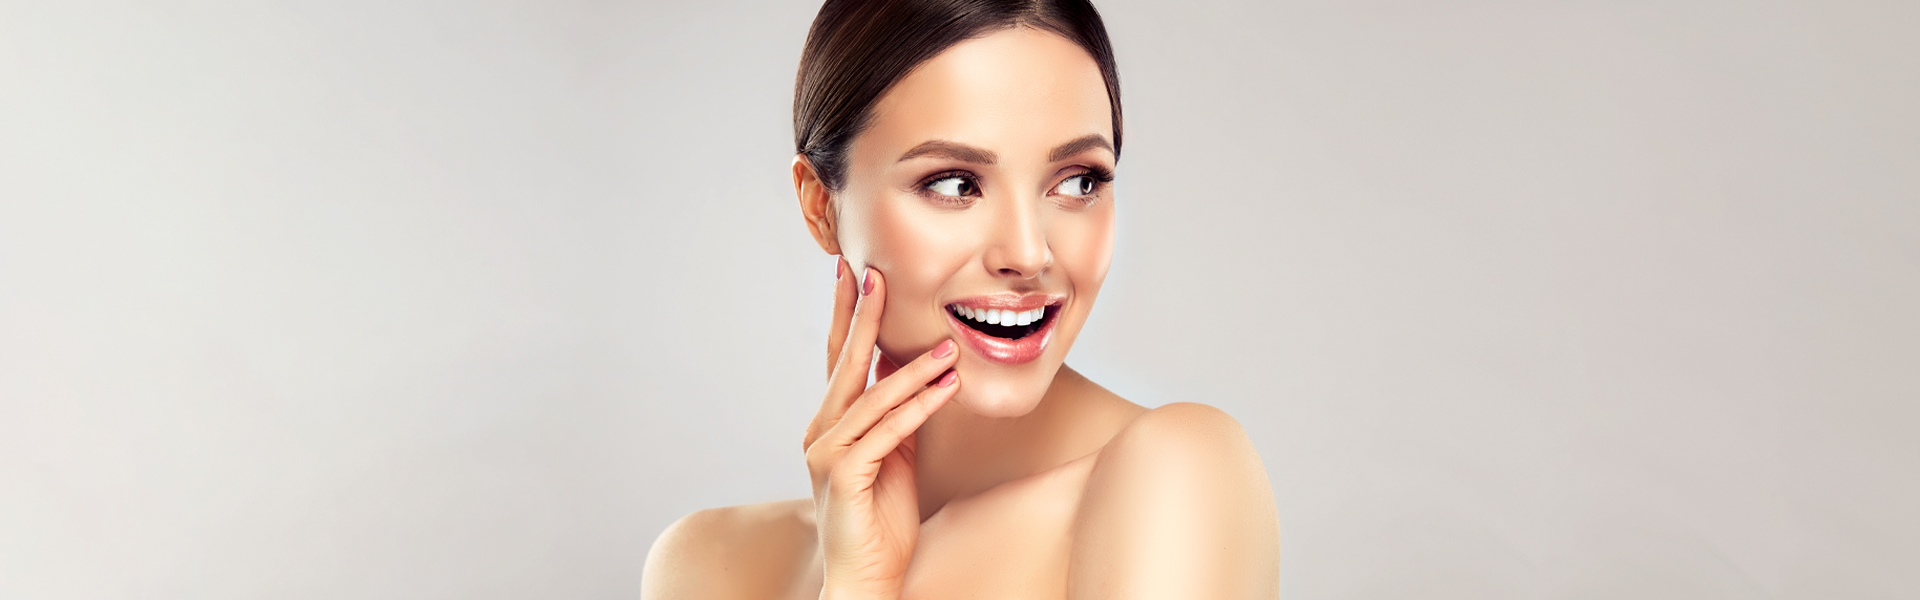 The Familiar Health Benefits of Cosmetic Dentistry